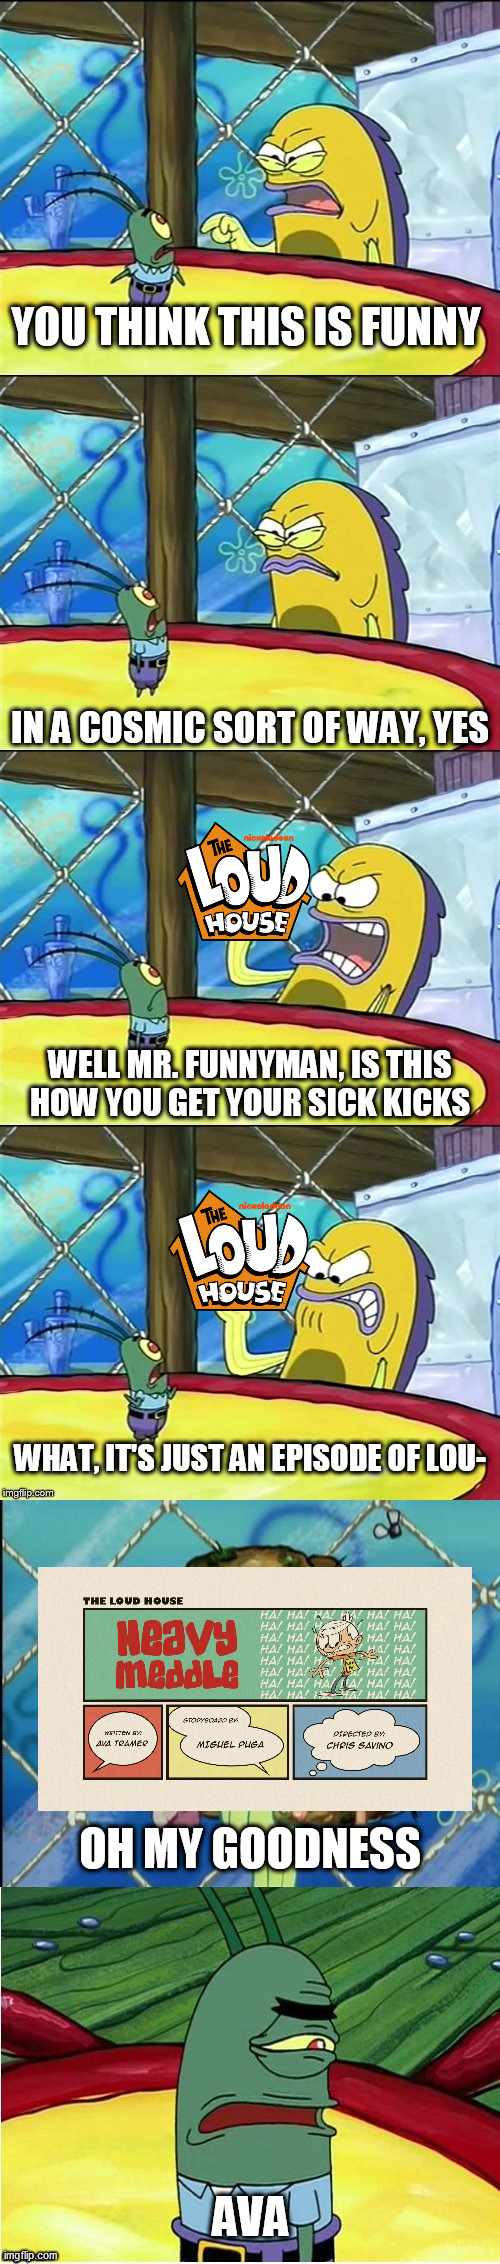 You Think This Is Funny (Loud House Edition) Part 2 | image tagged in loud house,the loud house,you think this is funny,is this how you get your sick kicks,heavy meddle,oh my goodness | made w/ Imgflip meme maker